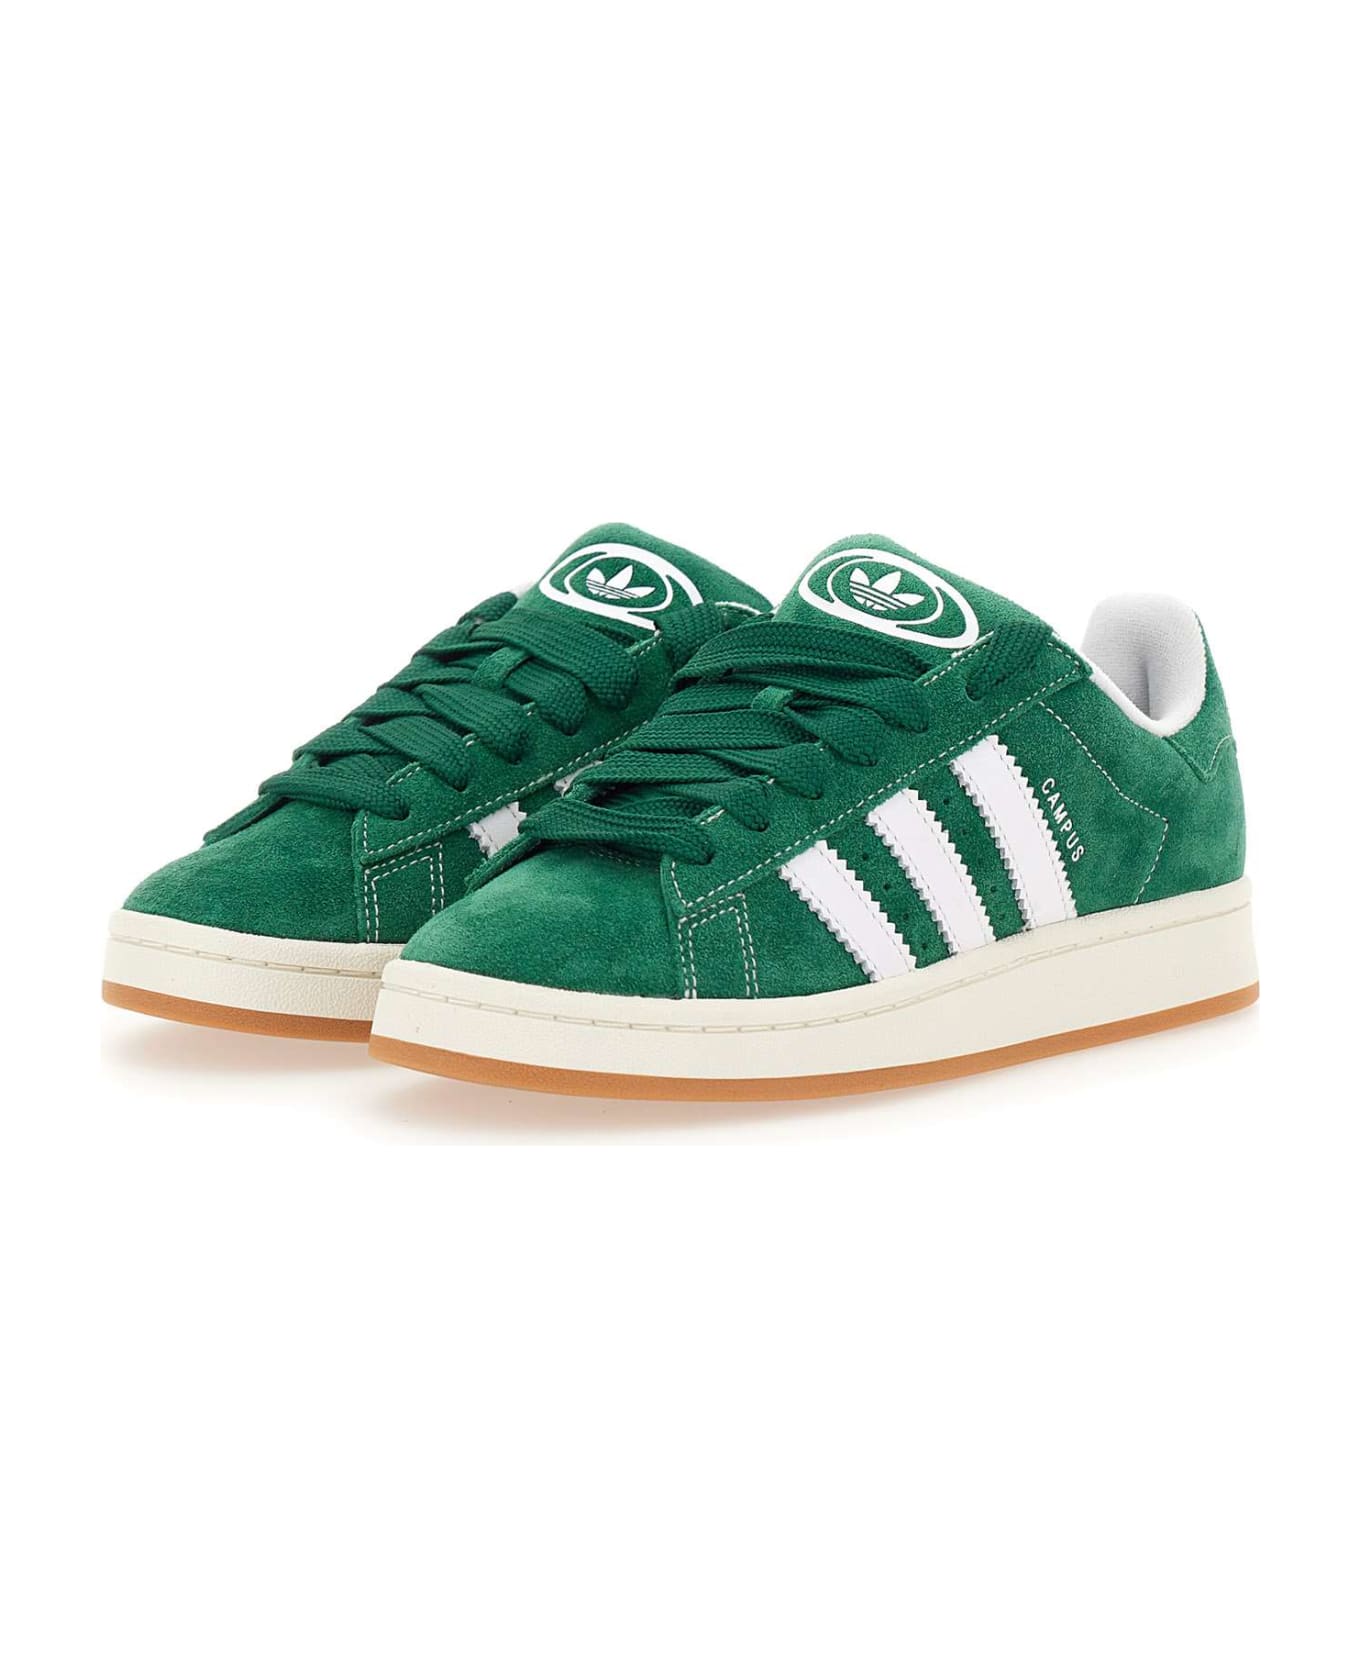 Adidas 'campus 00s' Sneakers - Drkgrn Ftwwht Owhite